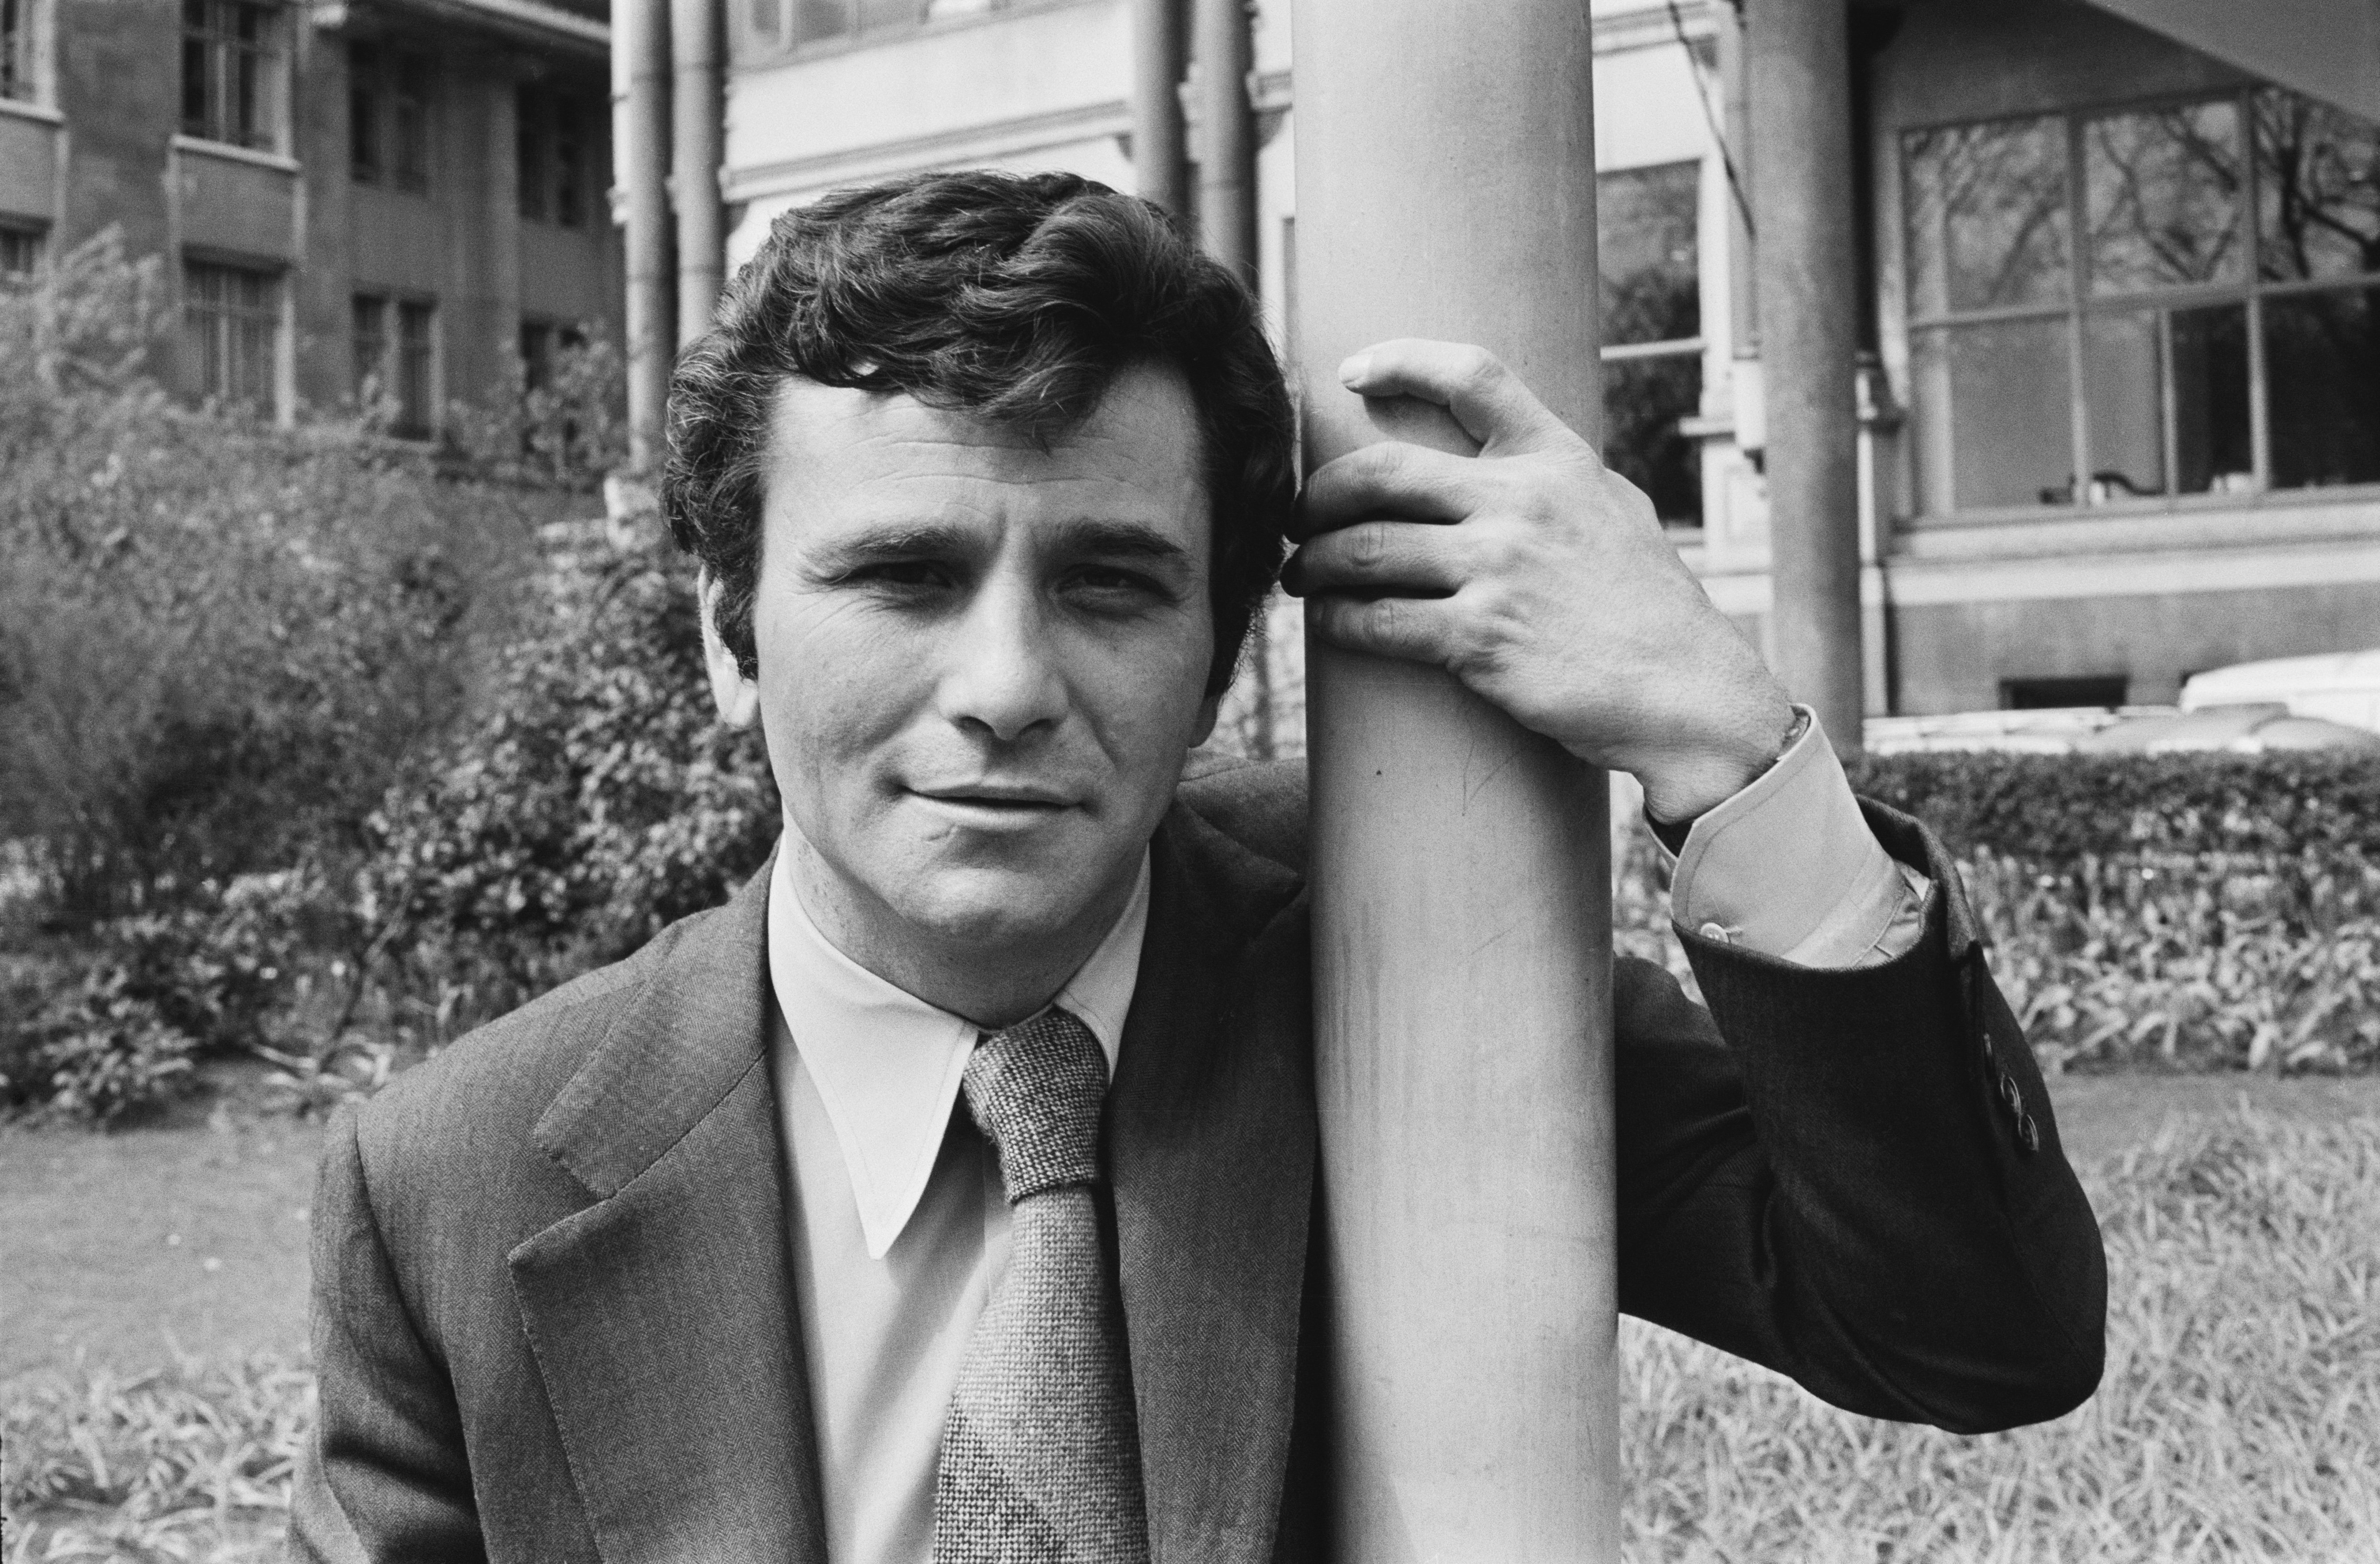 Peter Falk in London, United Kingdom, on April 24, 1969. | Source: Getty Images